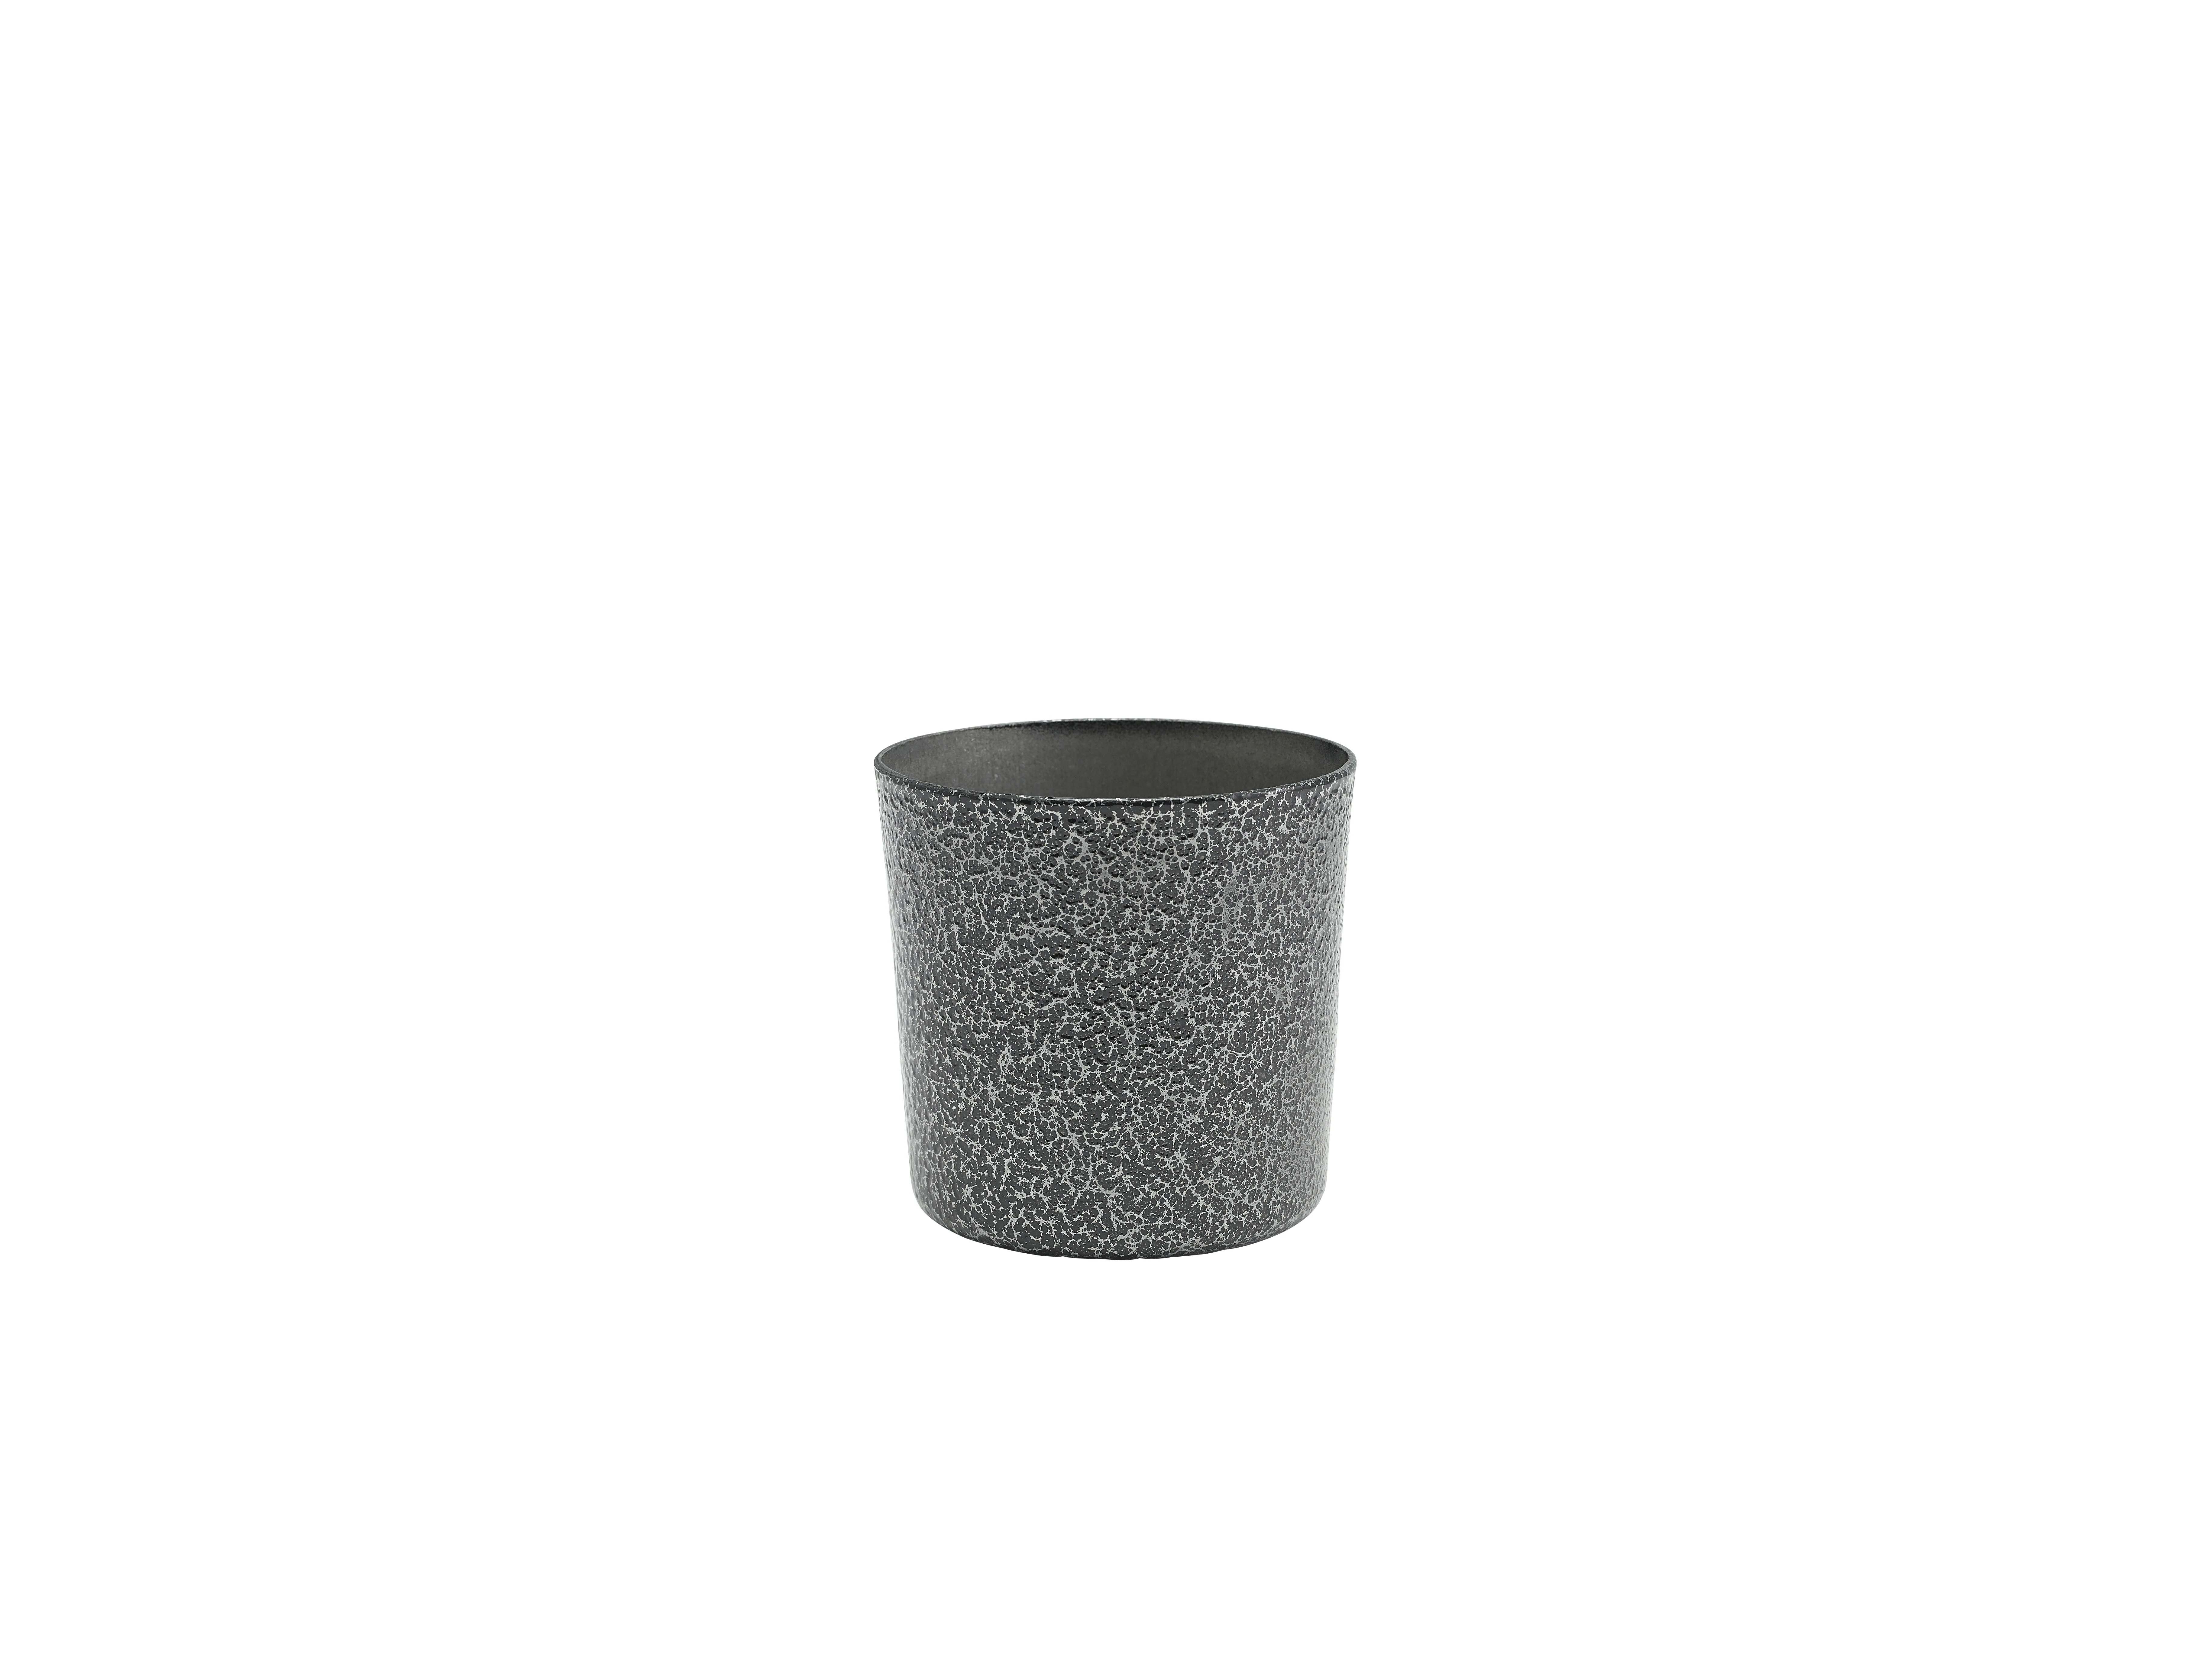 Stainless Steel Serving Cup 8.5 x 8.5cm Hammered Silver